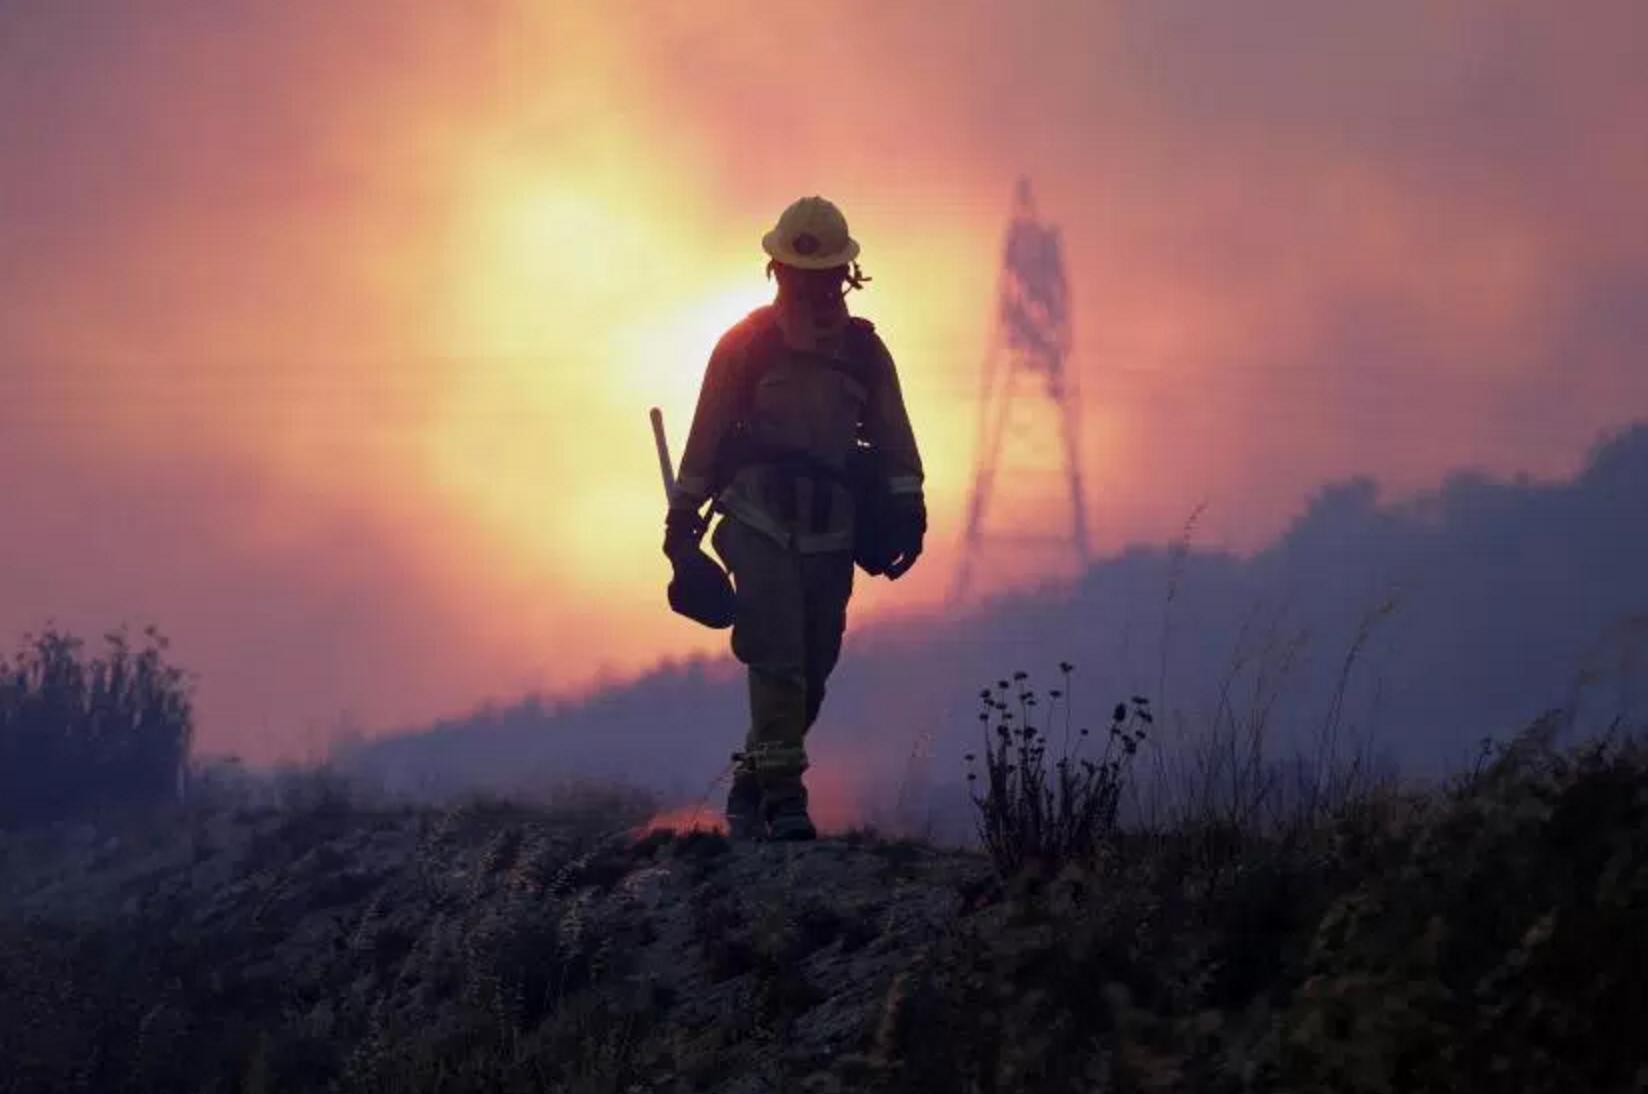 82,000 Evacuated as ‘Once in a Lifetime’ Wildfire Shocks California